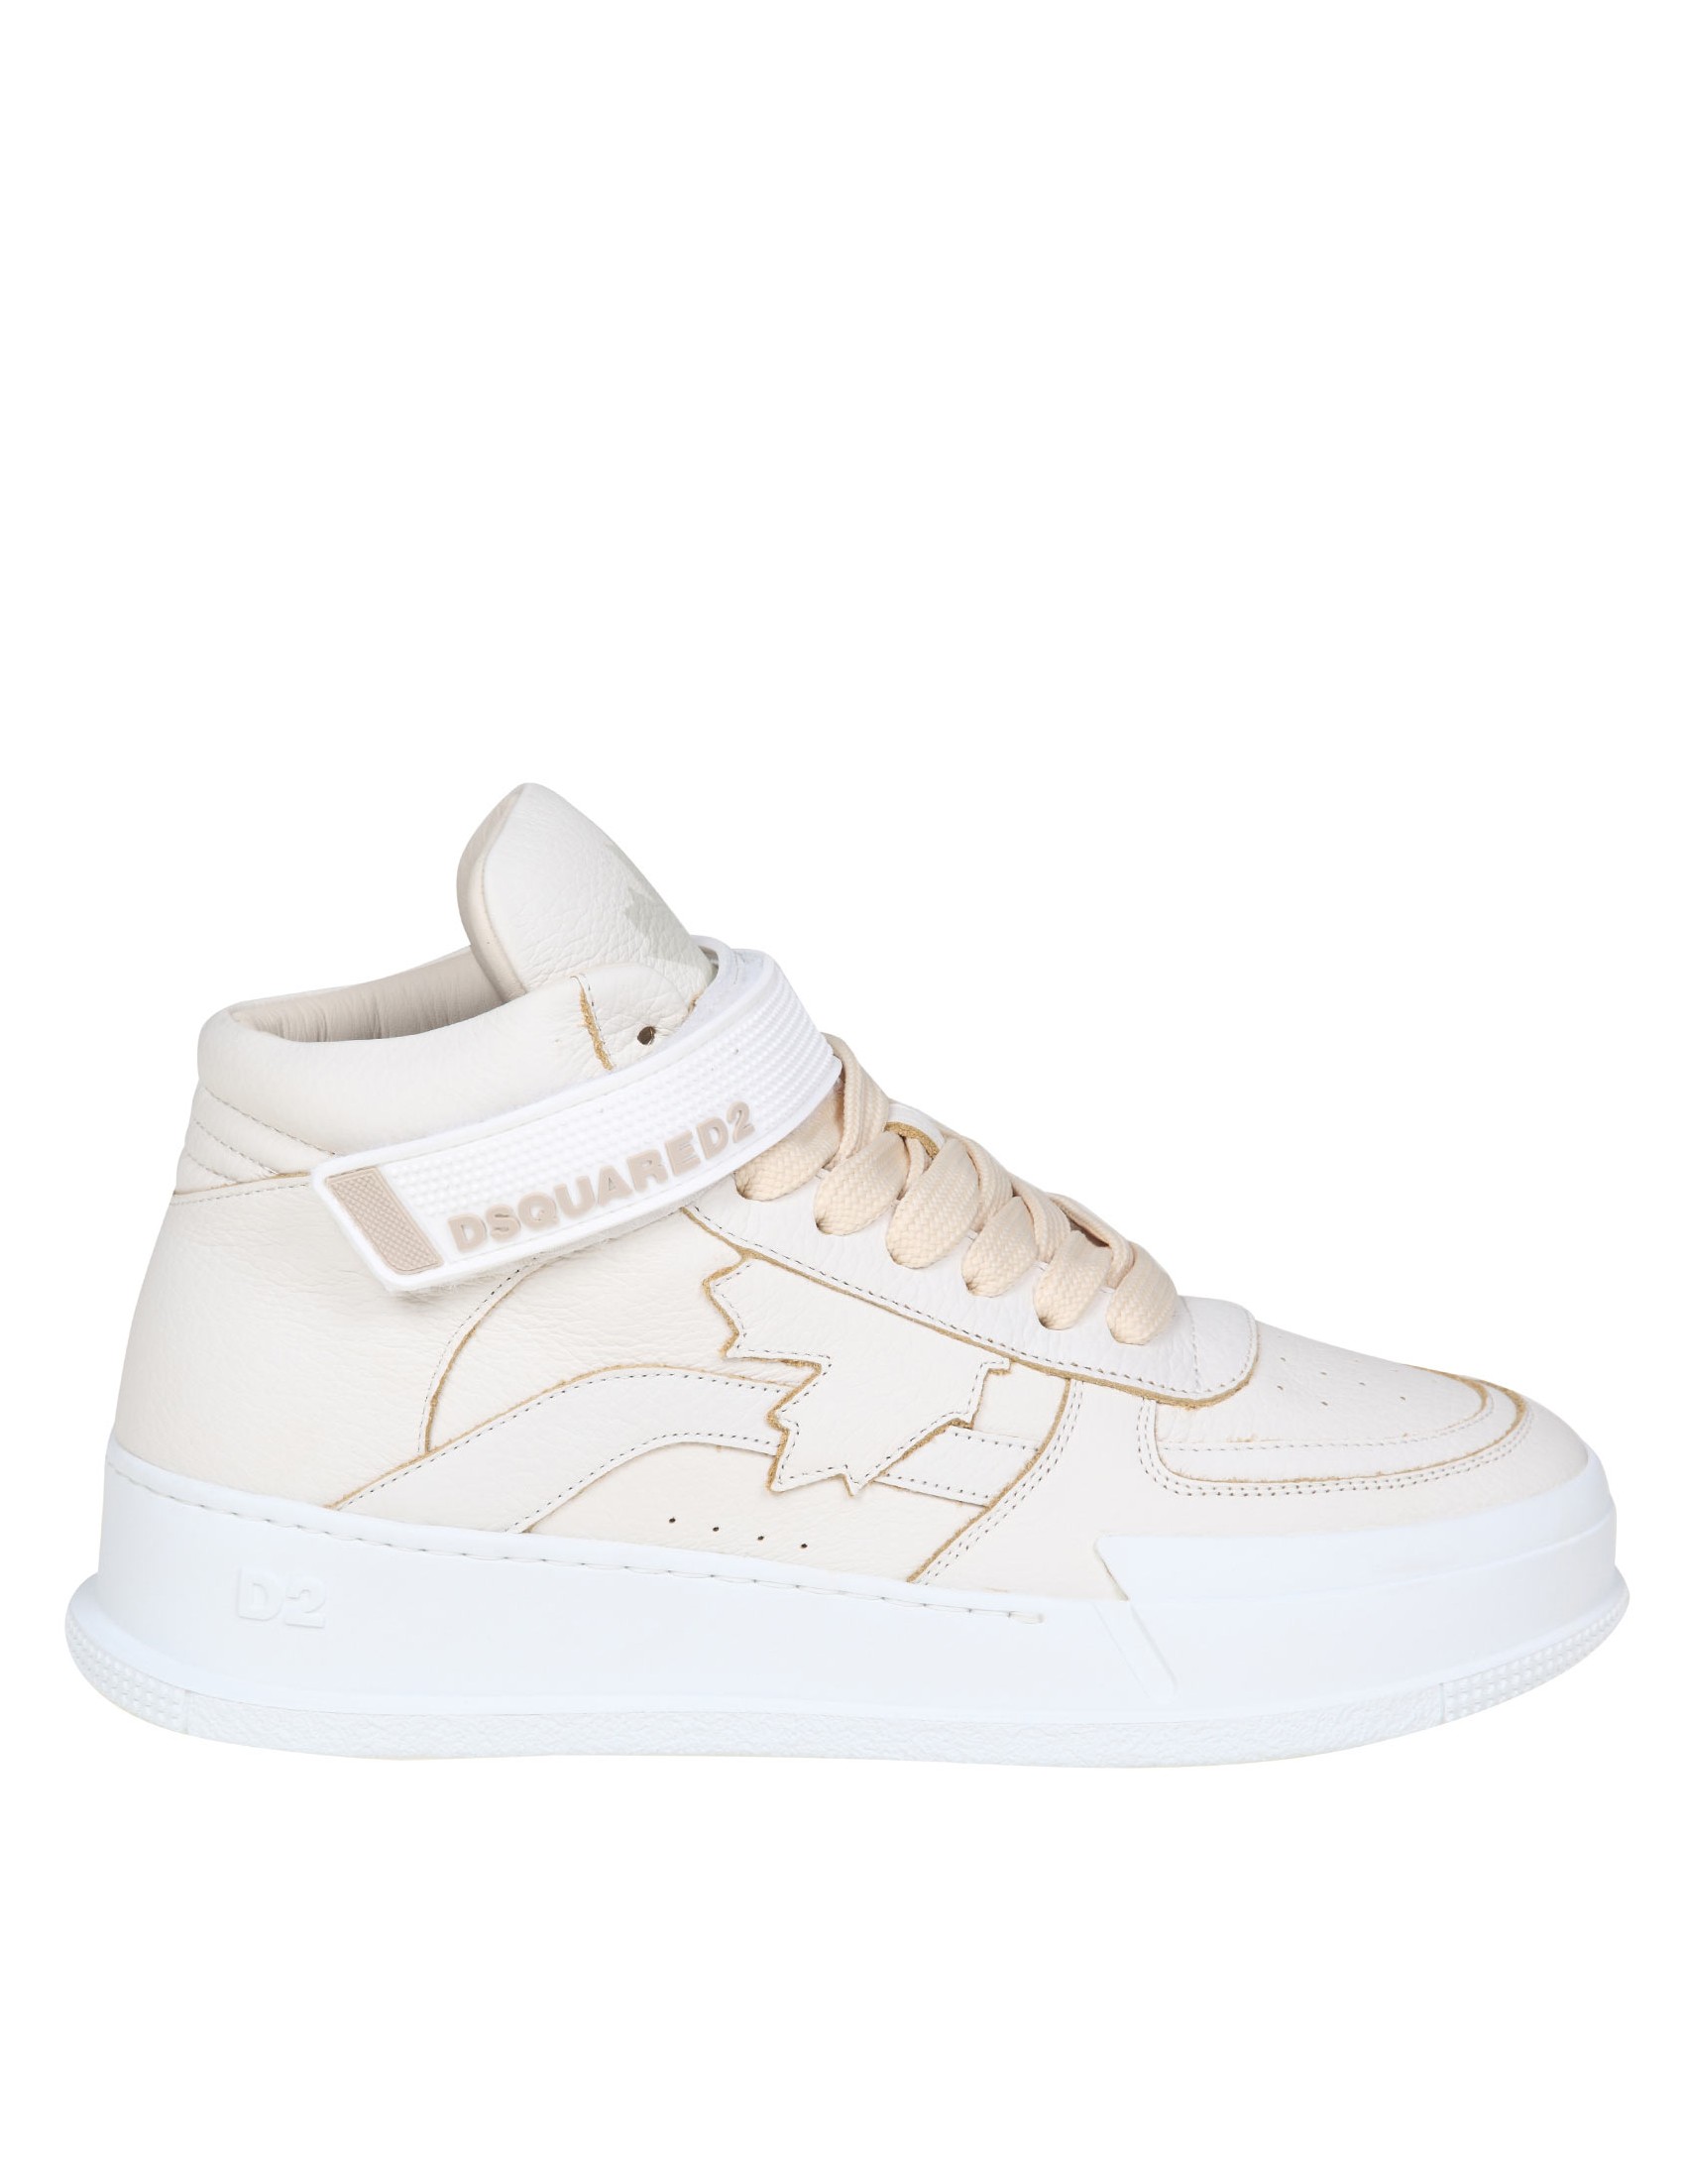 DSQUARED2 CANADIAN SNEAKERS IN CREAM COLOR LEATHER